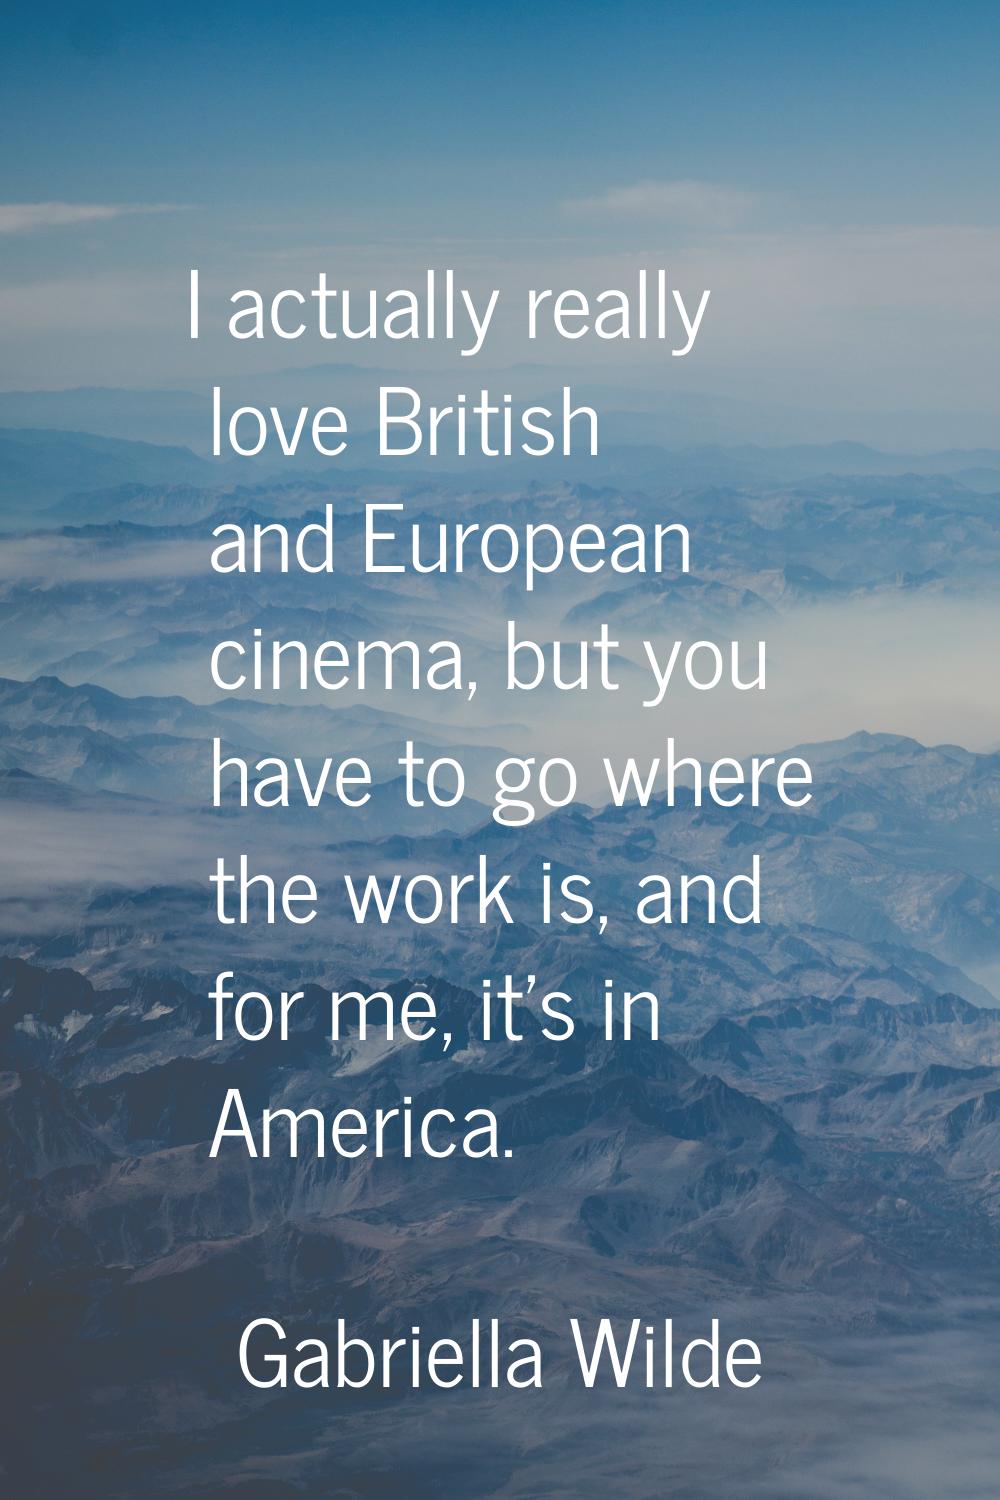 I actually really love British and European cinema, but you have to go where the work is, and for m